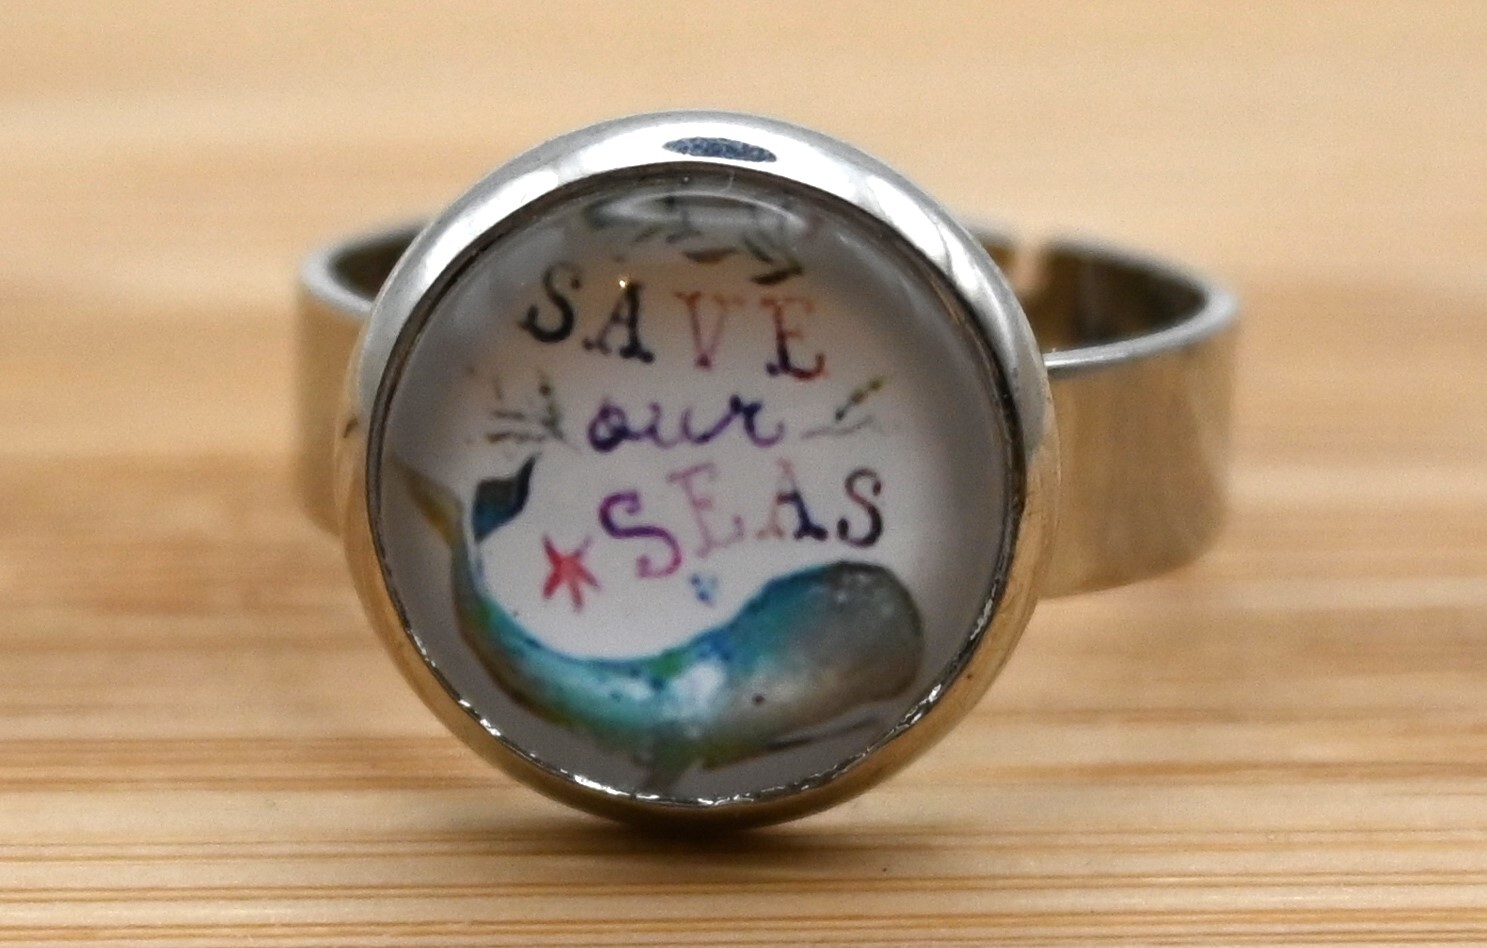 Ring Save the seas